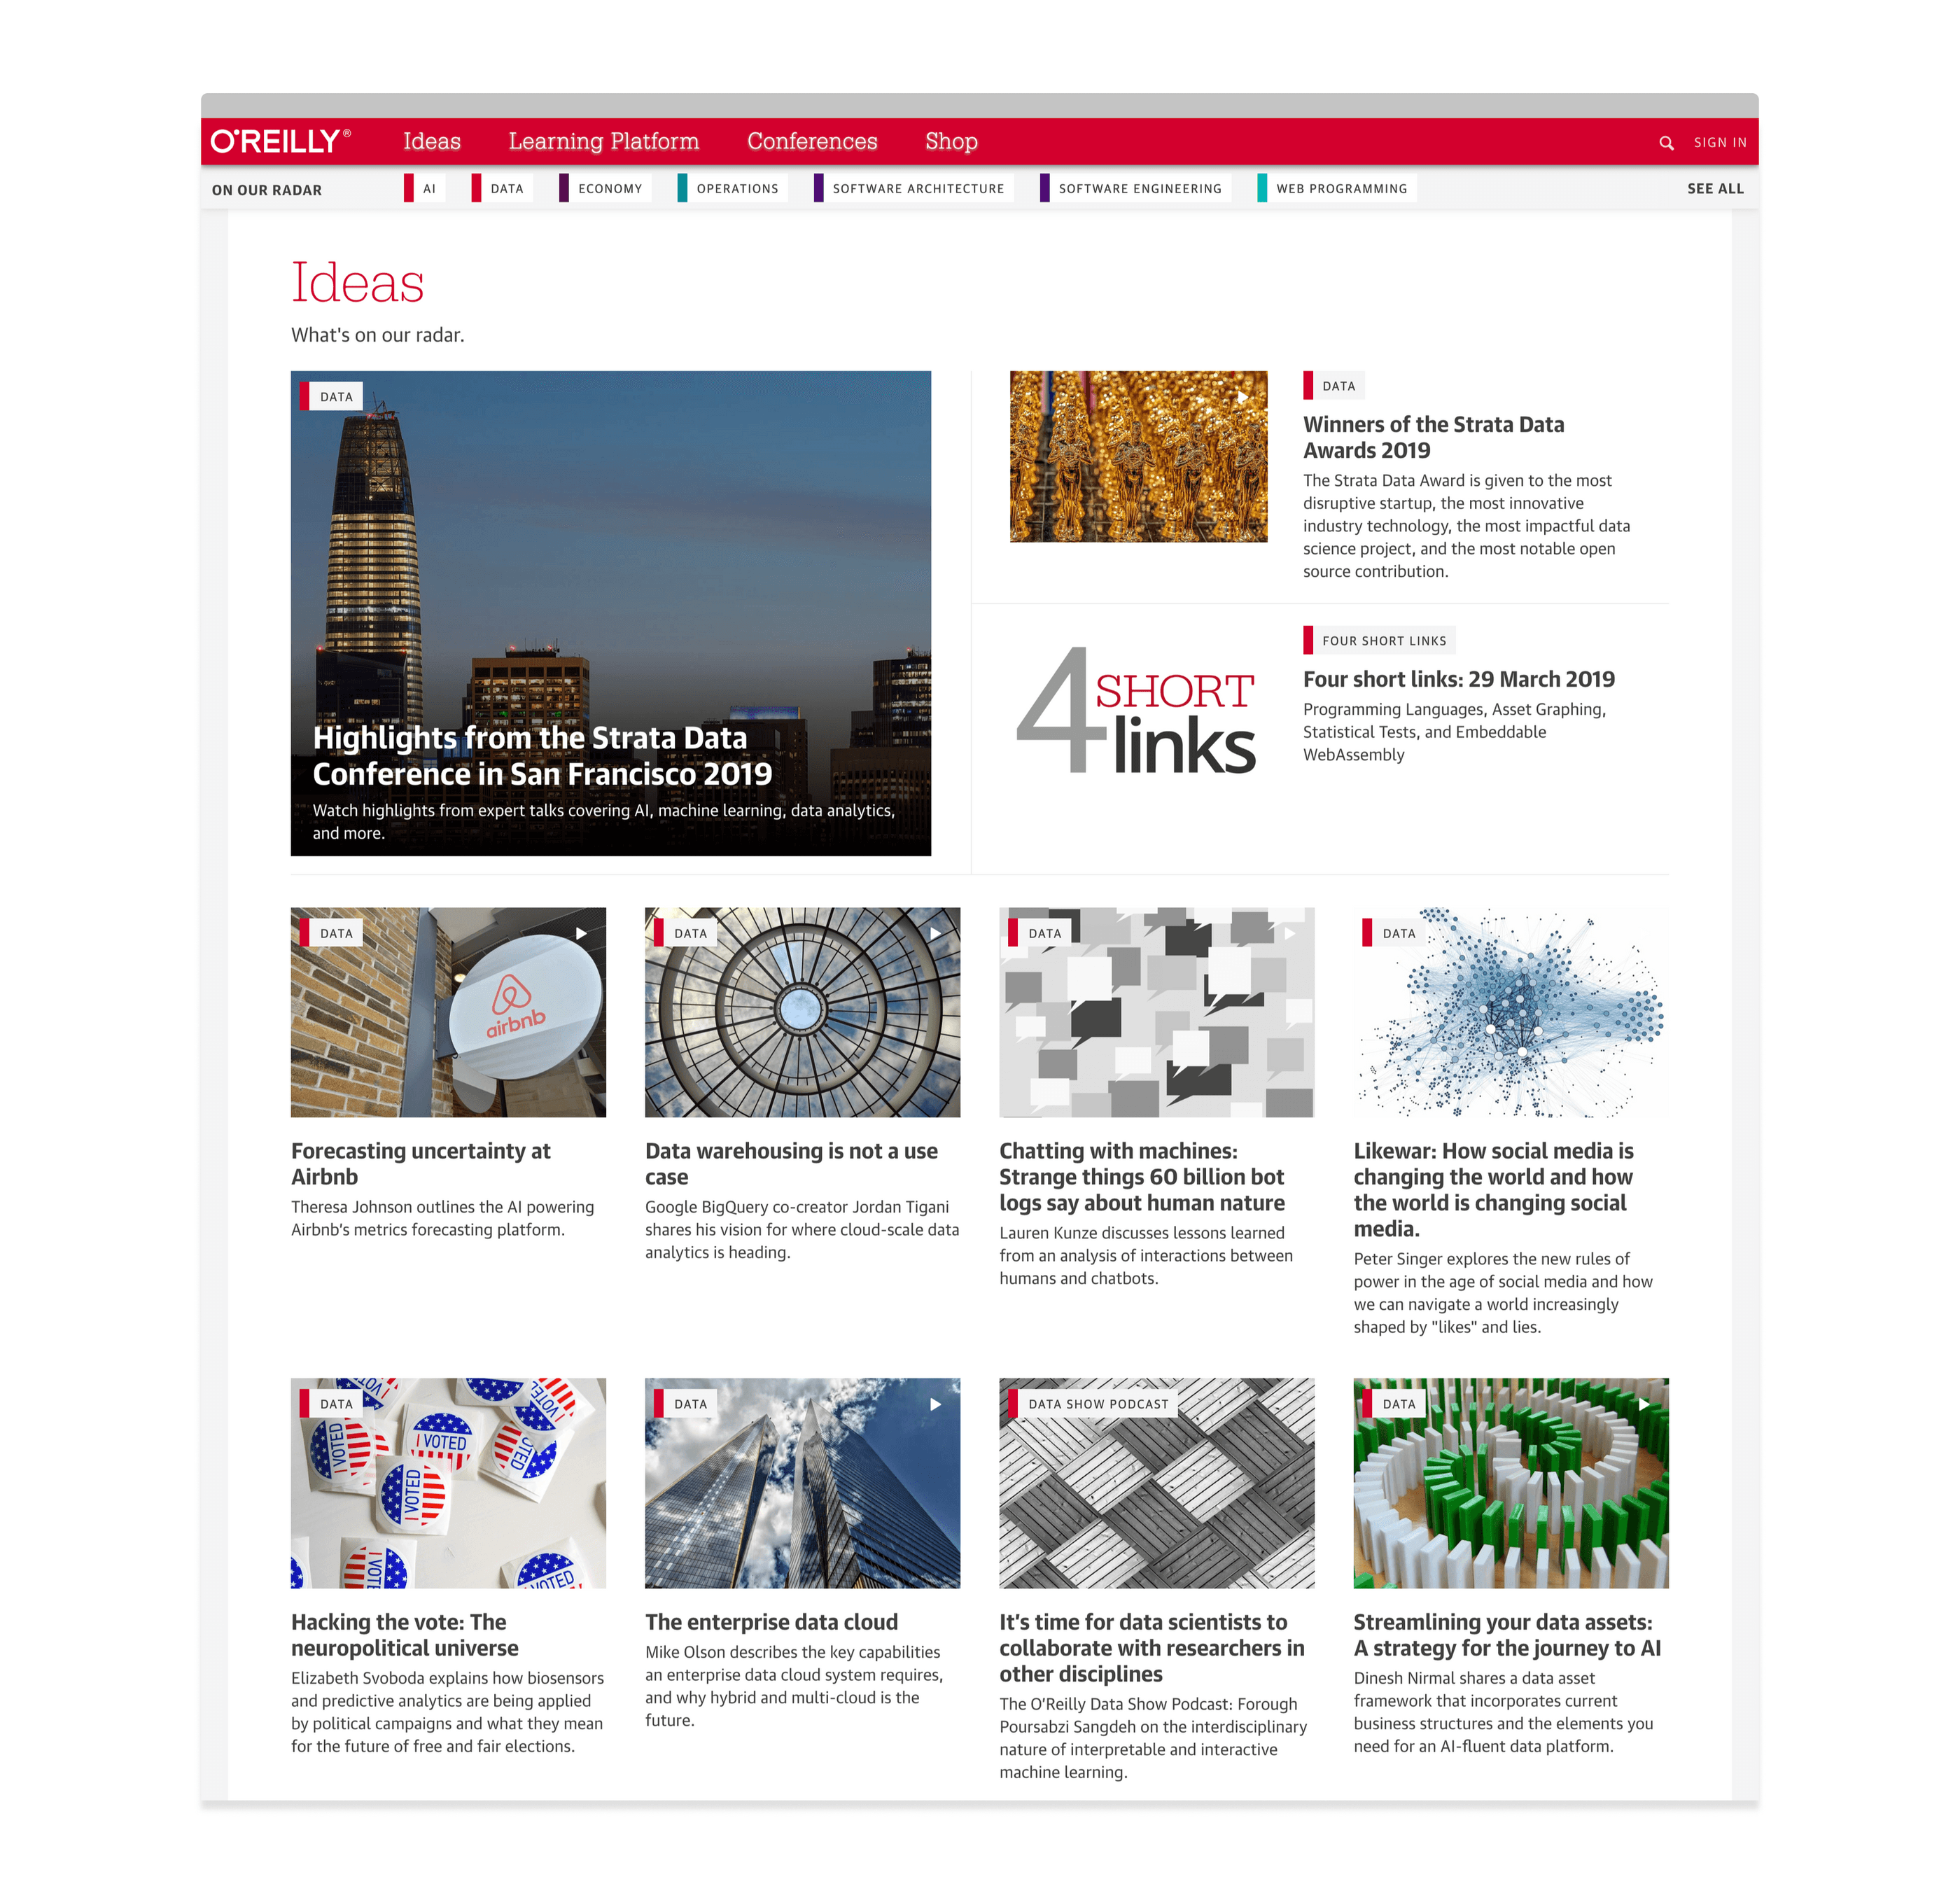 Articles from across all topic pages could be found in the Ideas section